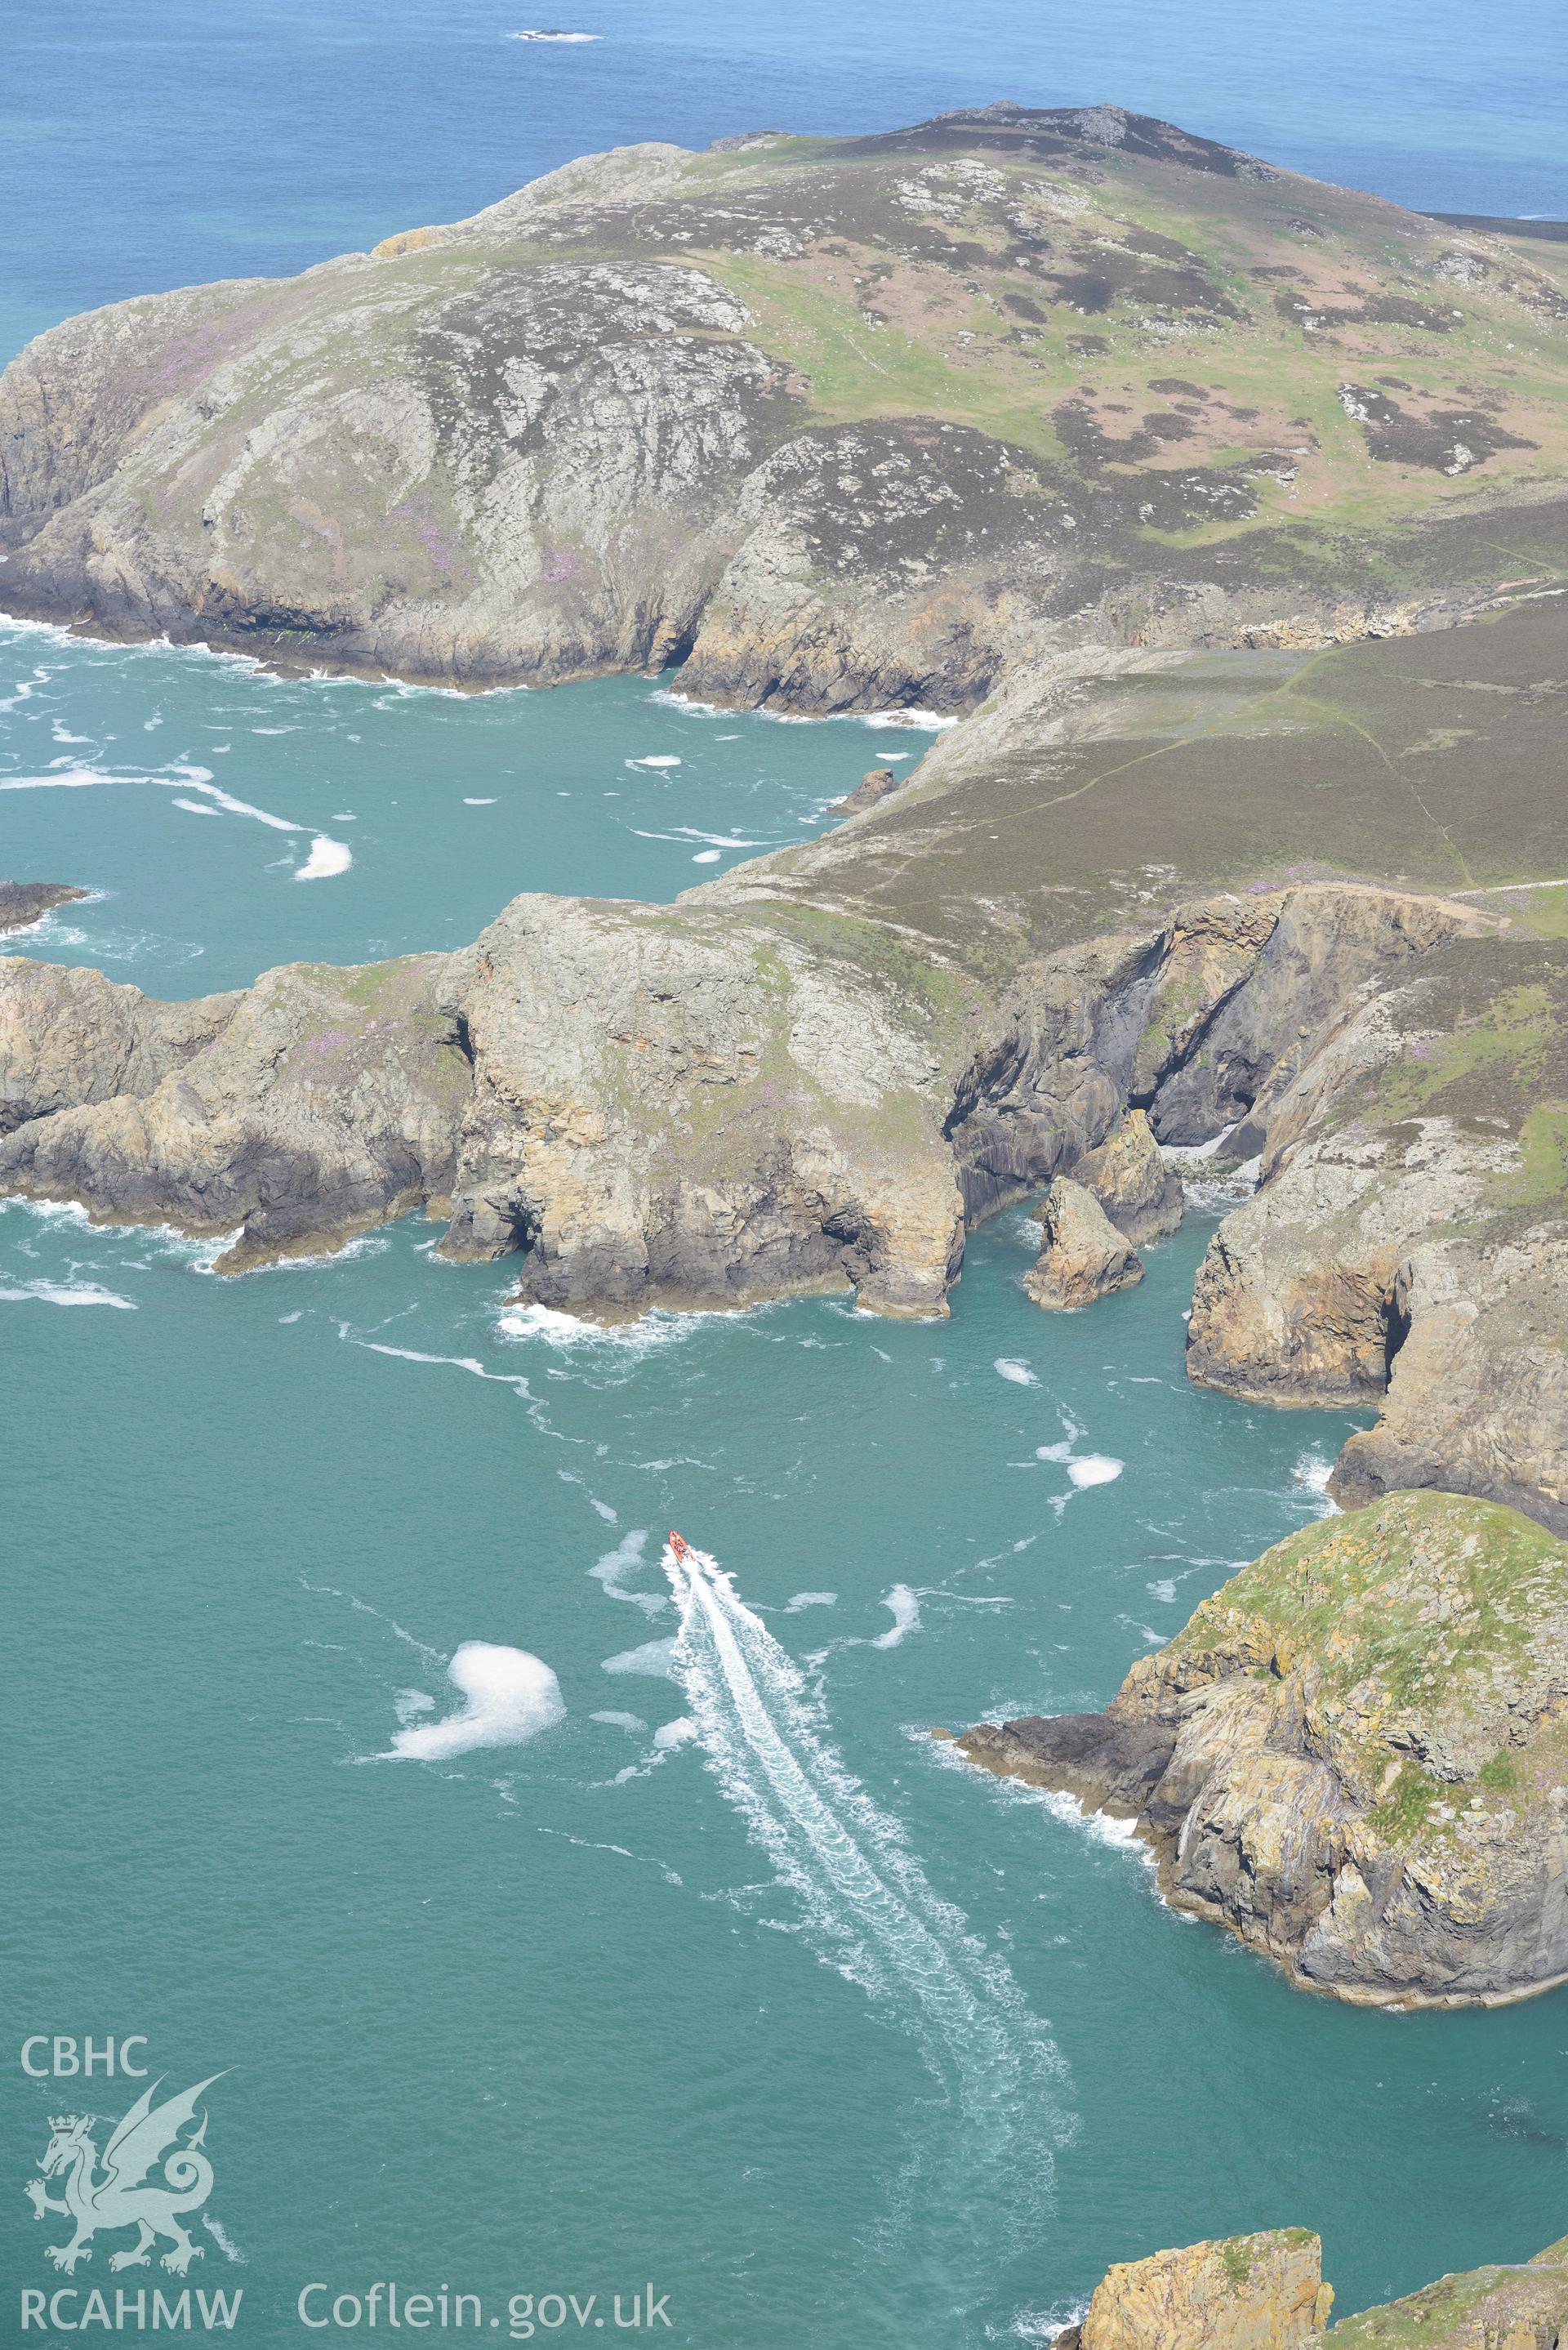 Ogof Thomas Williams on Ramsey Island, off the coast near St Davids. Oblique aerial photograph taken during the Royal Commission's programme of archaeological aerial reconnaissance by Toby Driver on 13th May 2015.